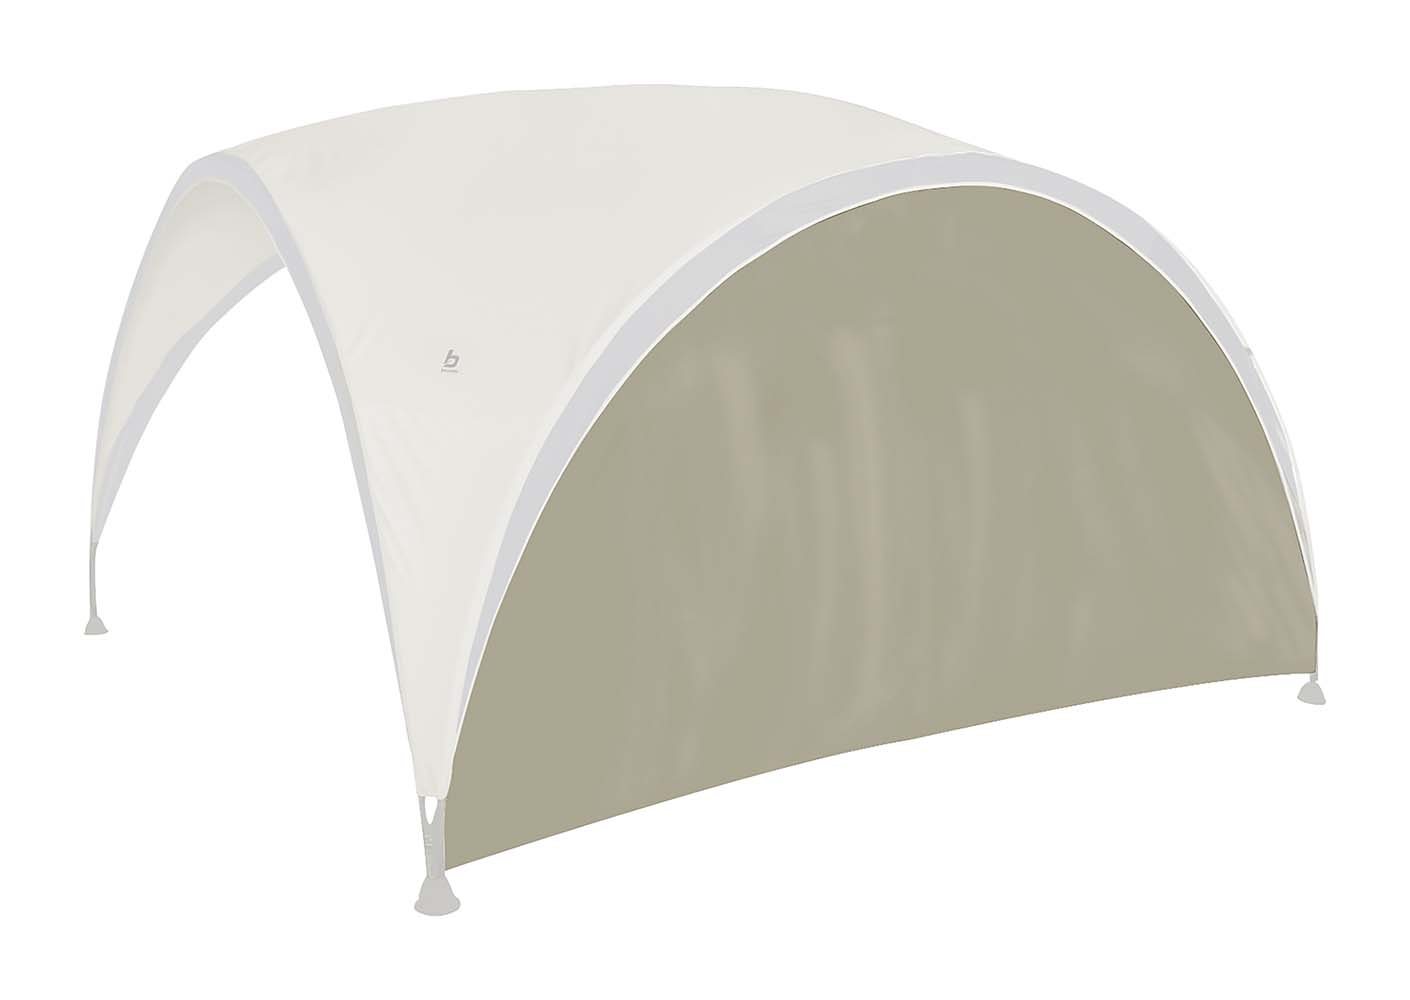 4472210 Bo-Camp - Party Shelter Sidewall - Großes Partyzelt 4,26x4,26x2,33 Meter - Seitenwand